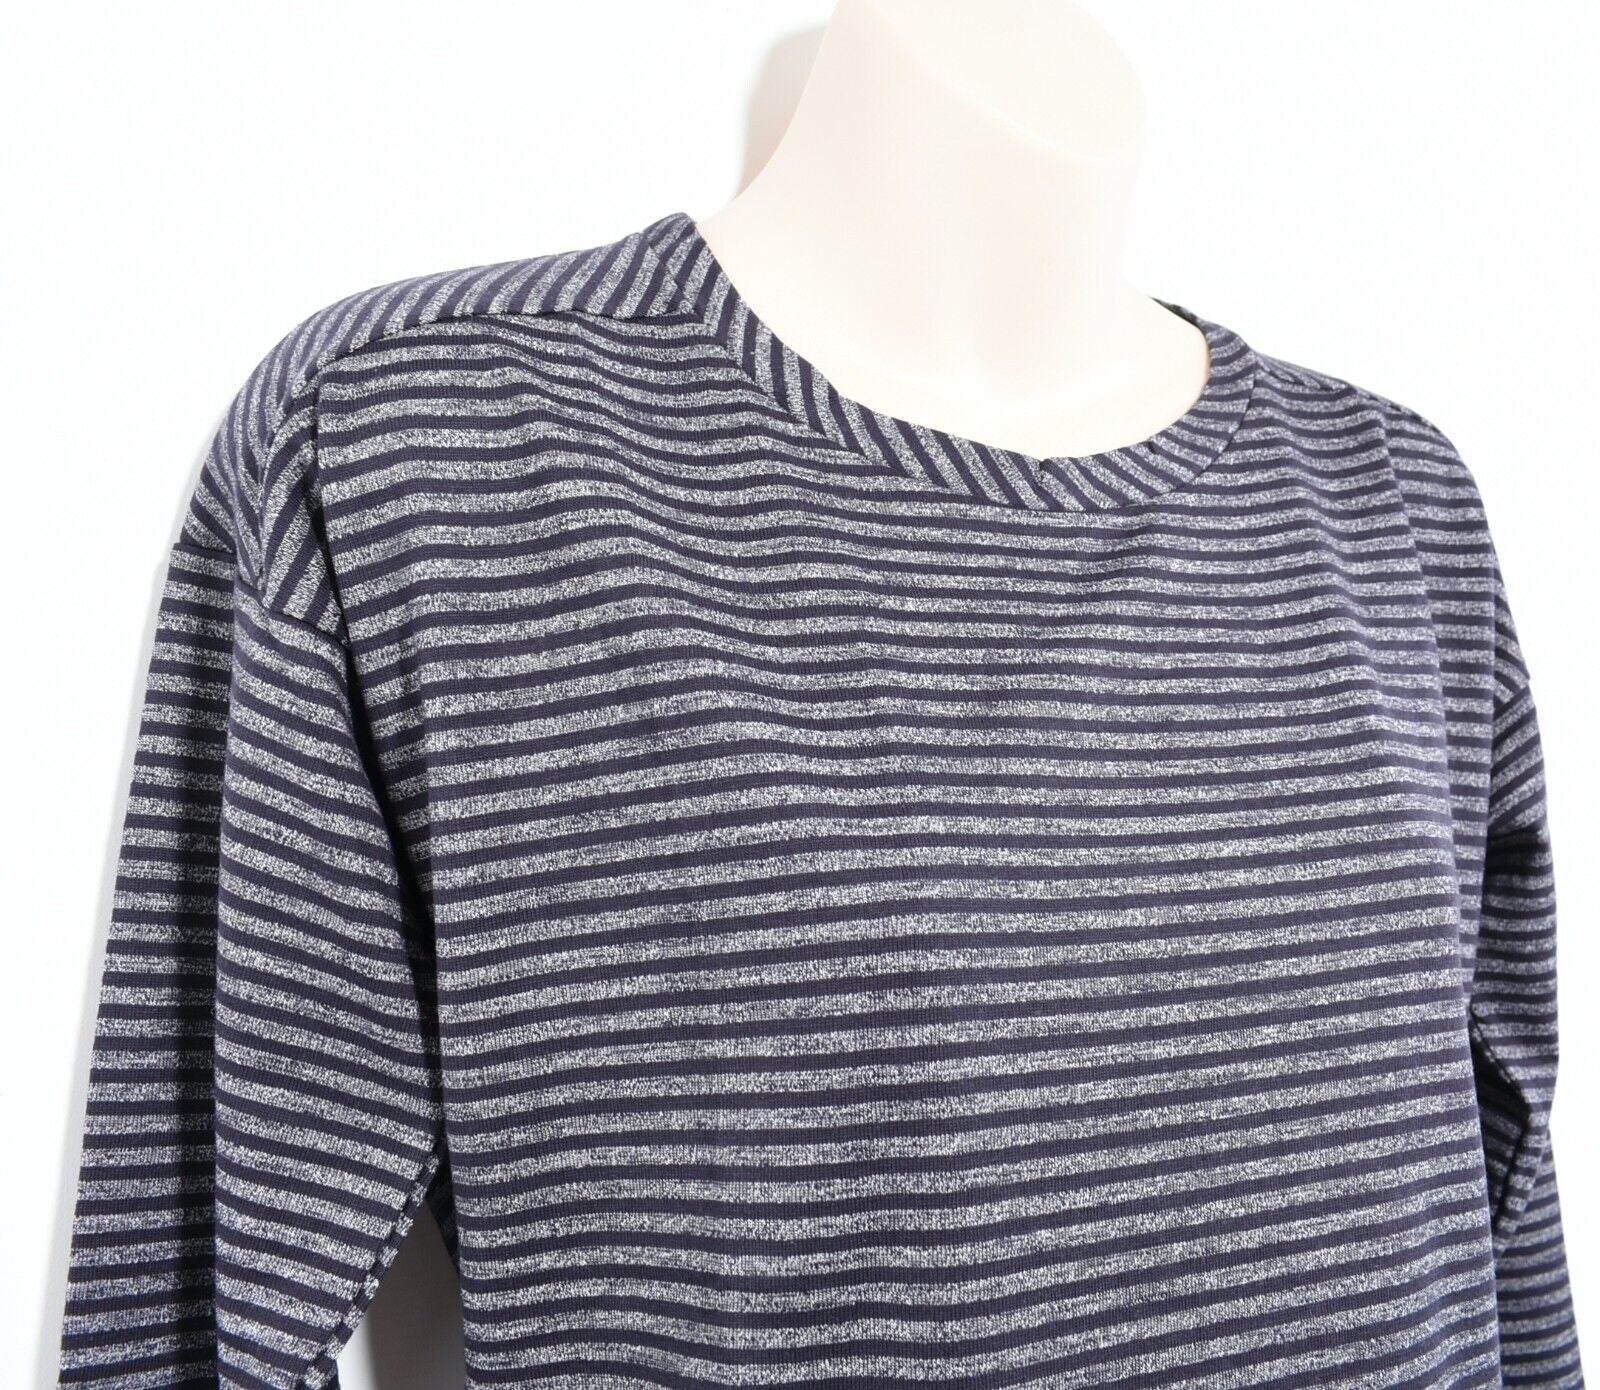 LACOSTE Womens Long Sleeve Striped Top, Navy Blue-Grey Striped, size XS